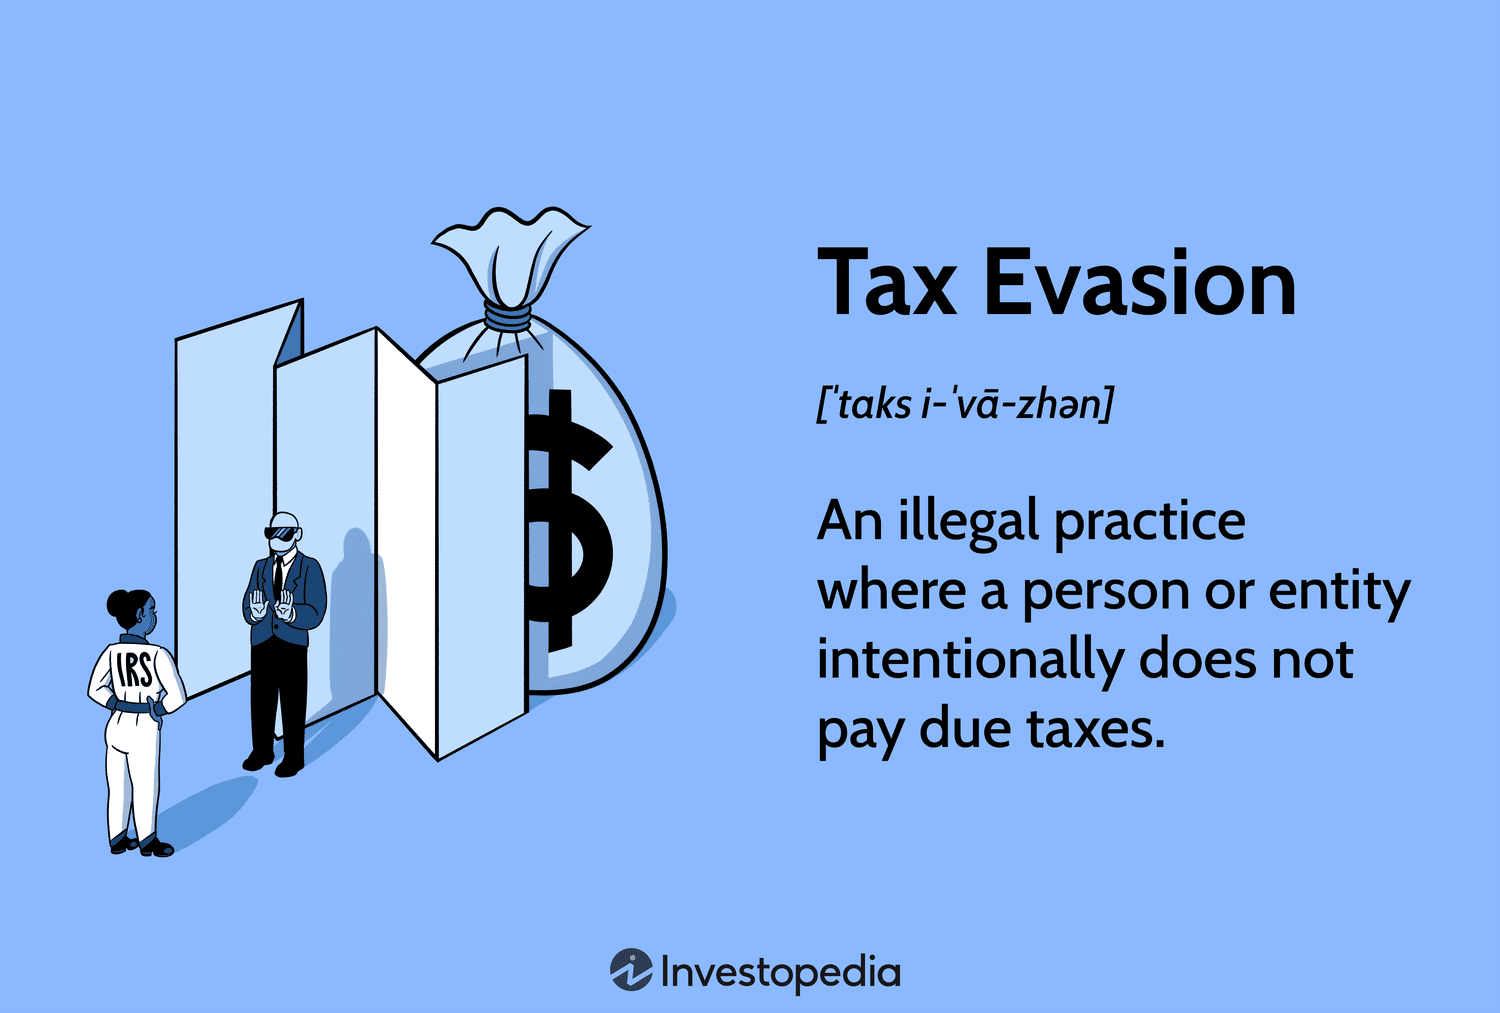 Tax Evasion: An illegal practice where a person or entity intentionally does not pay due taxes.